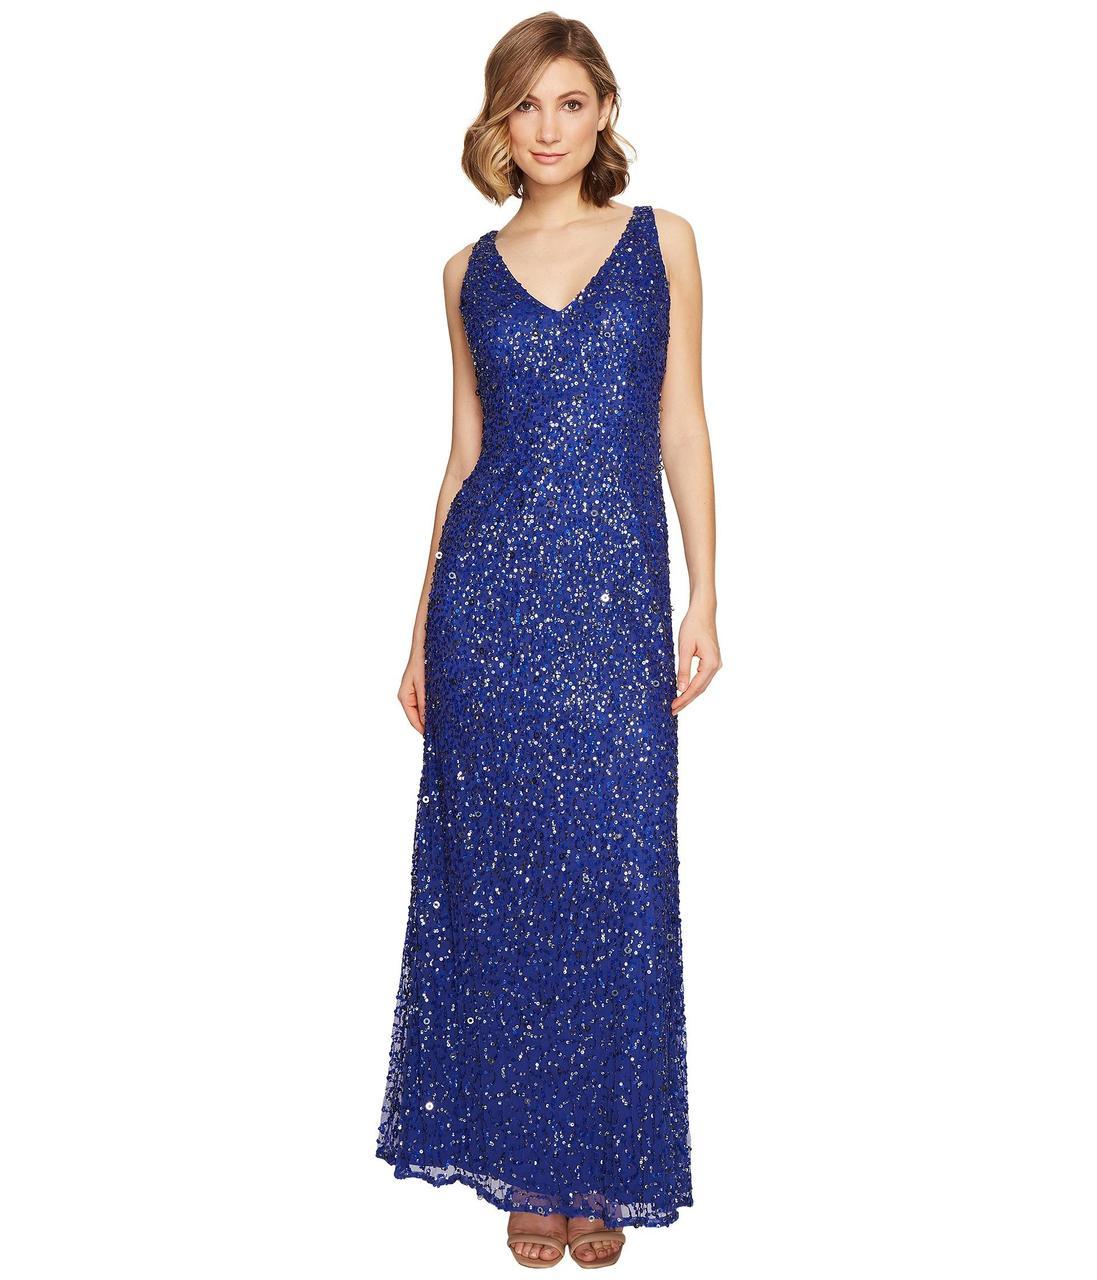 Image of Adrianna Papell - 91920030 Sleeveless Cutout Embellished Gown